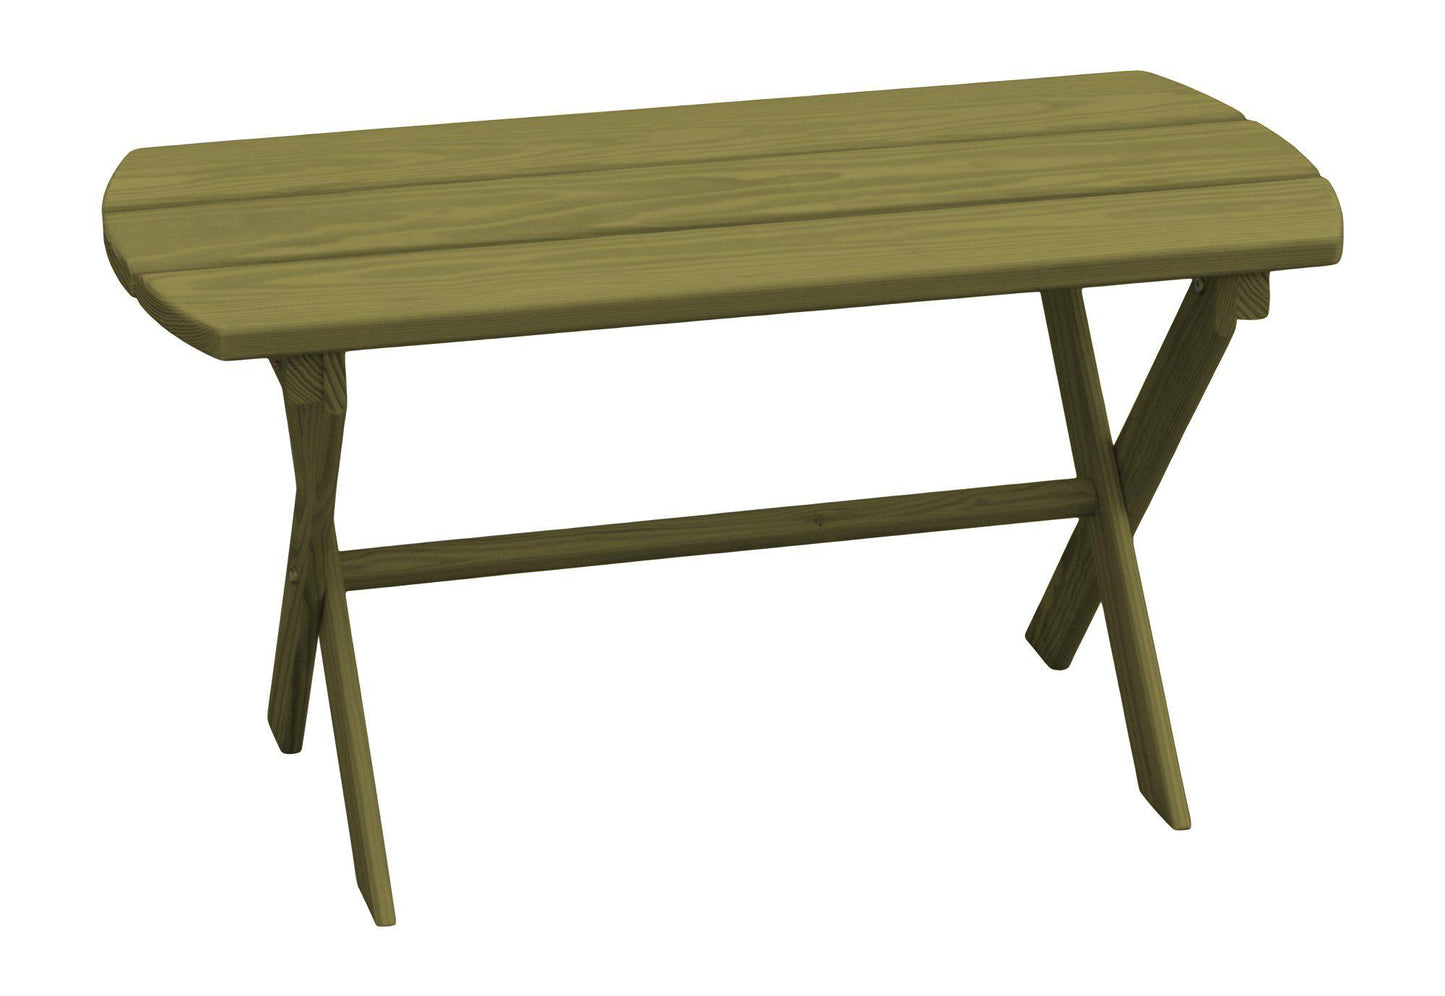 A&L Furniture Co. Yellow Pine Folding Coffee Table - LEAD TIME TO SHIP 10 BUSINESS DAYS